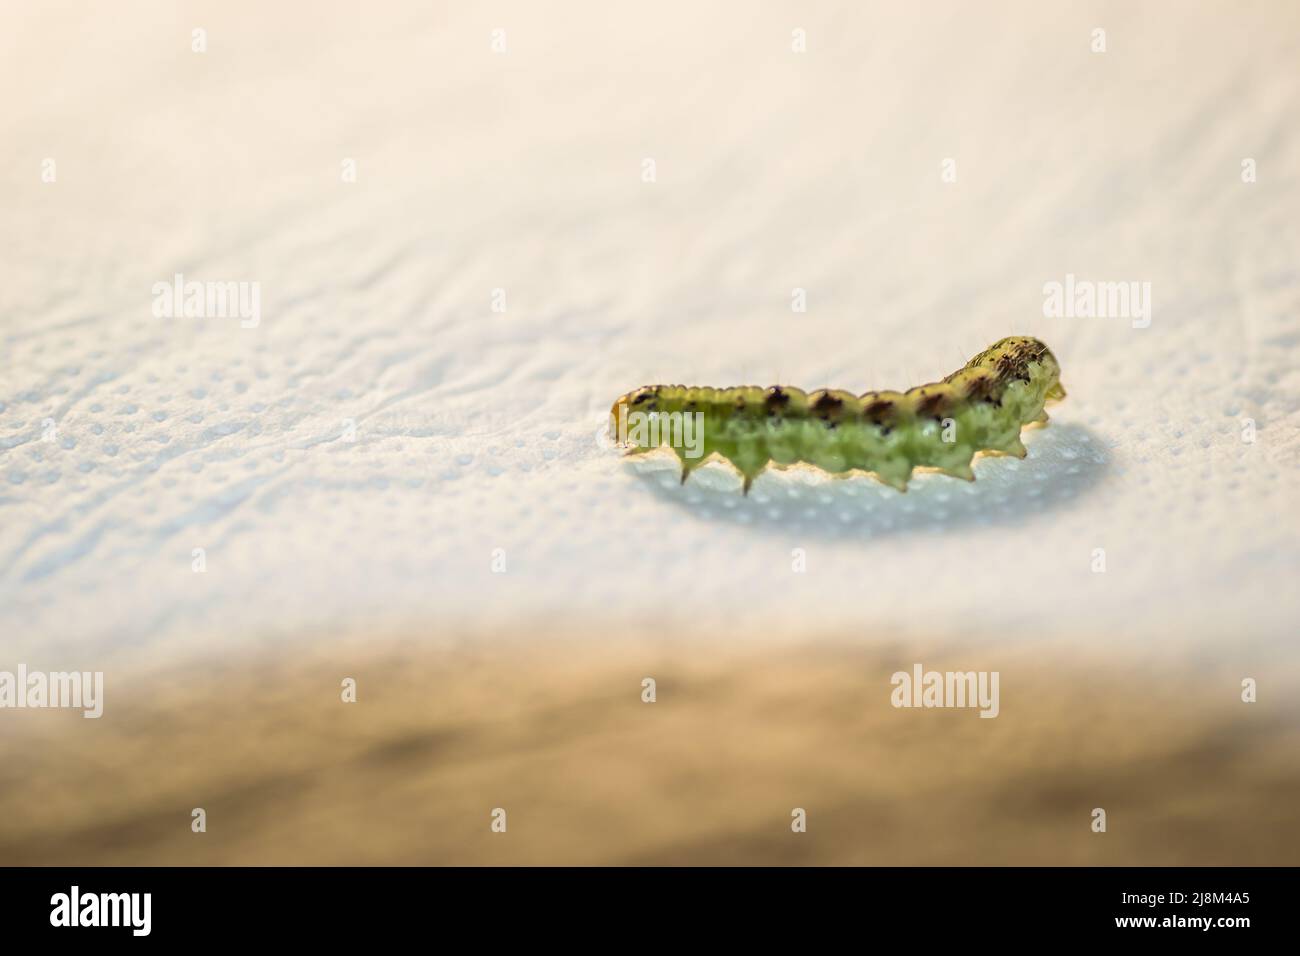 Green caterpillar on white paper, close-up. Stock Photo